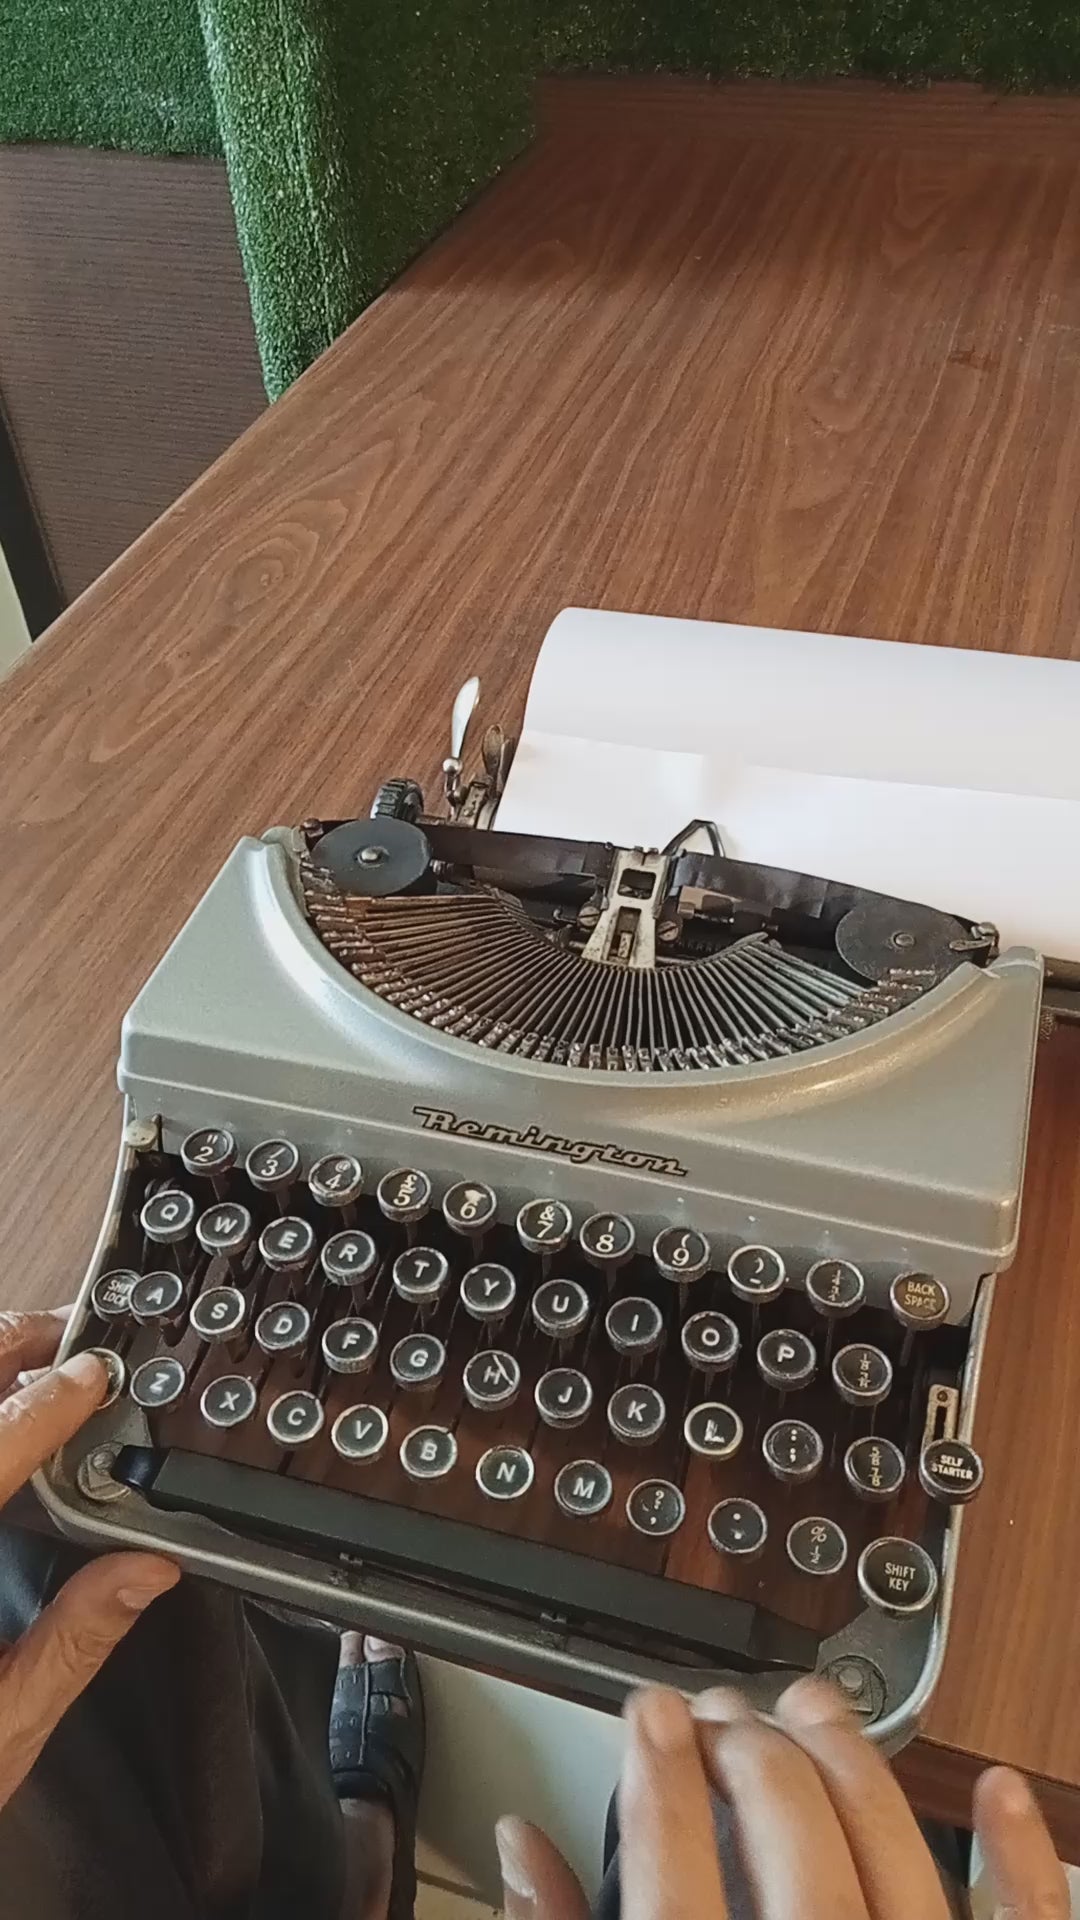 Video of Remington Vintage Typewriter. Available from universaltypewritercompany.in